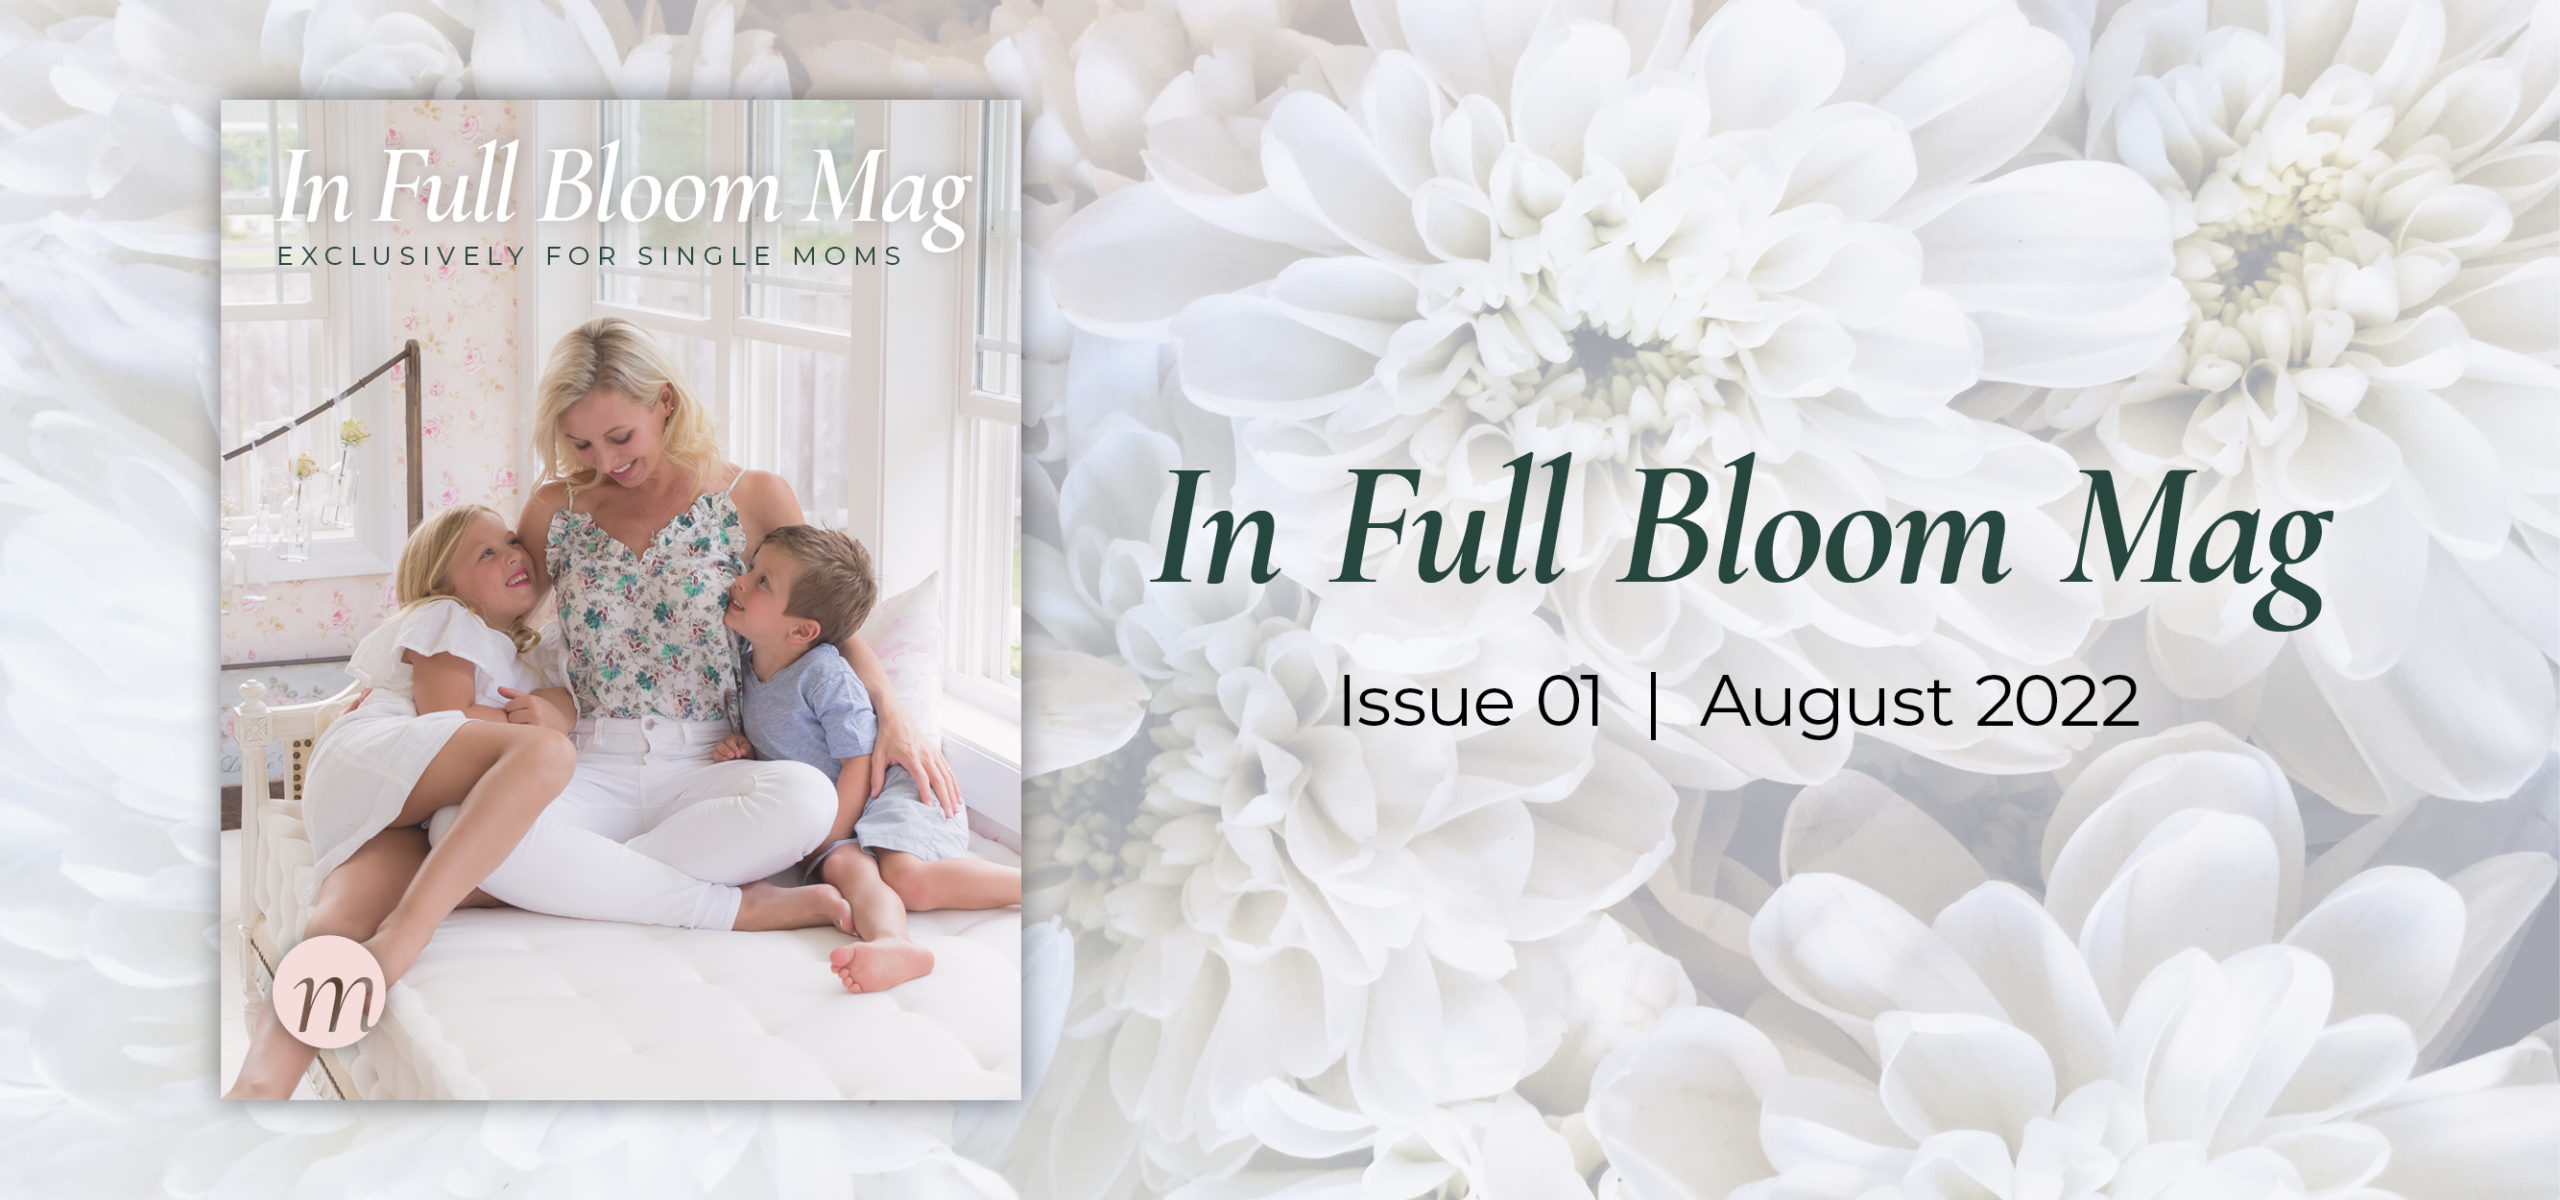 In Full Bloom Mag | Issue 01 | August 2022